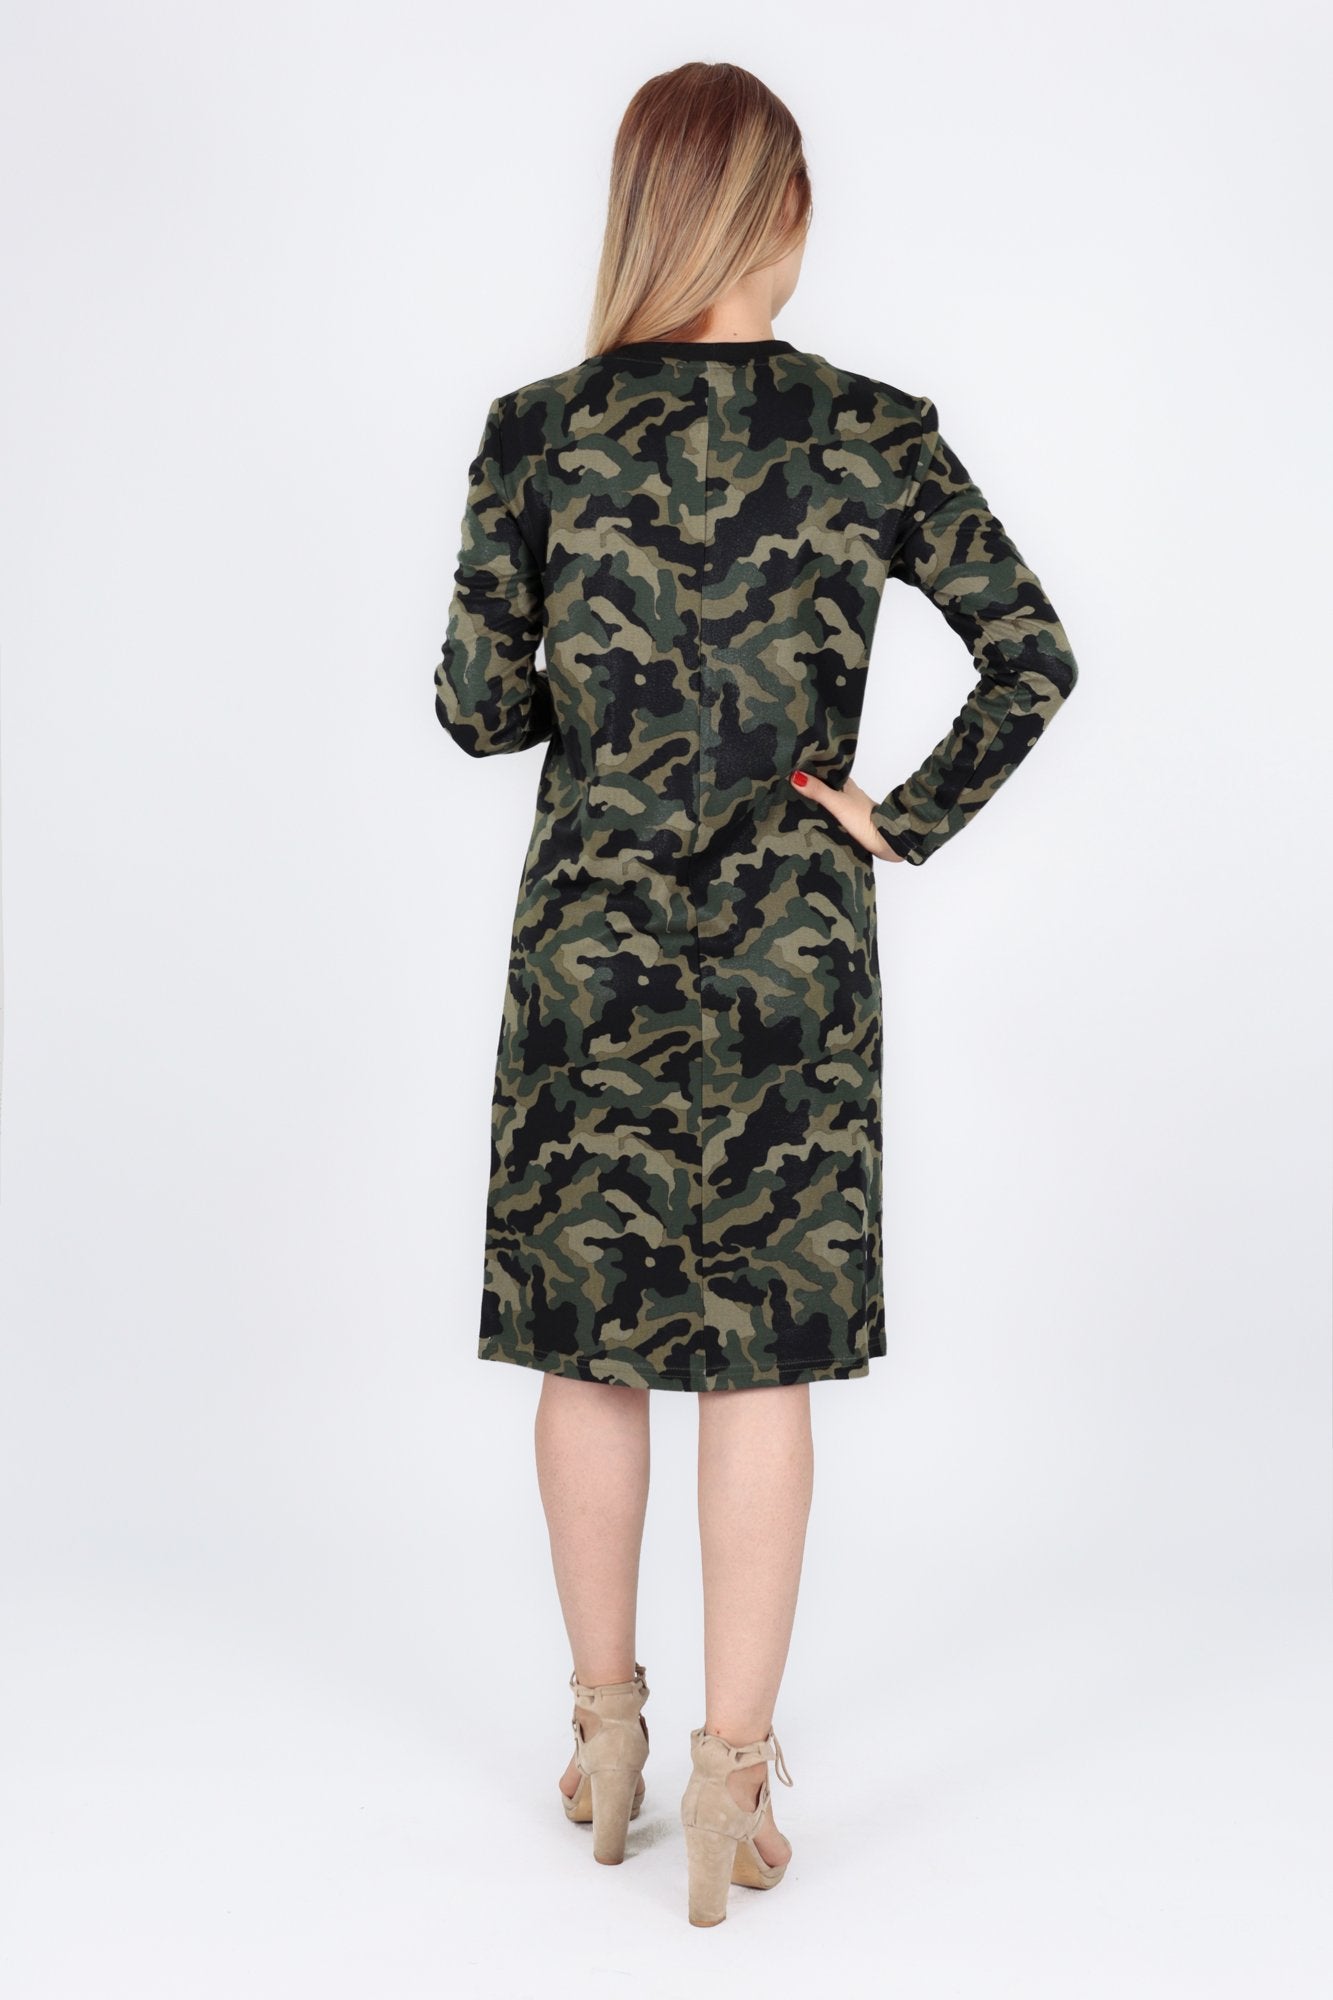 chassca shiny Camouflage printed design dress - Breakmood